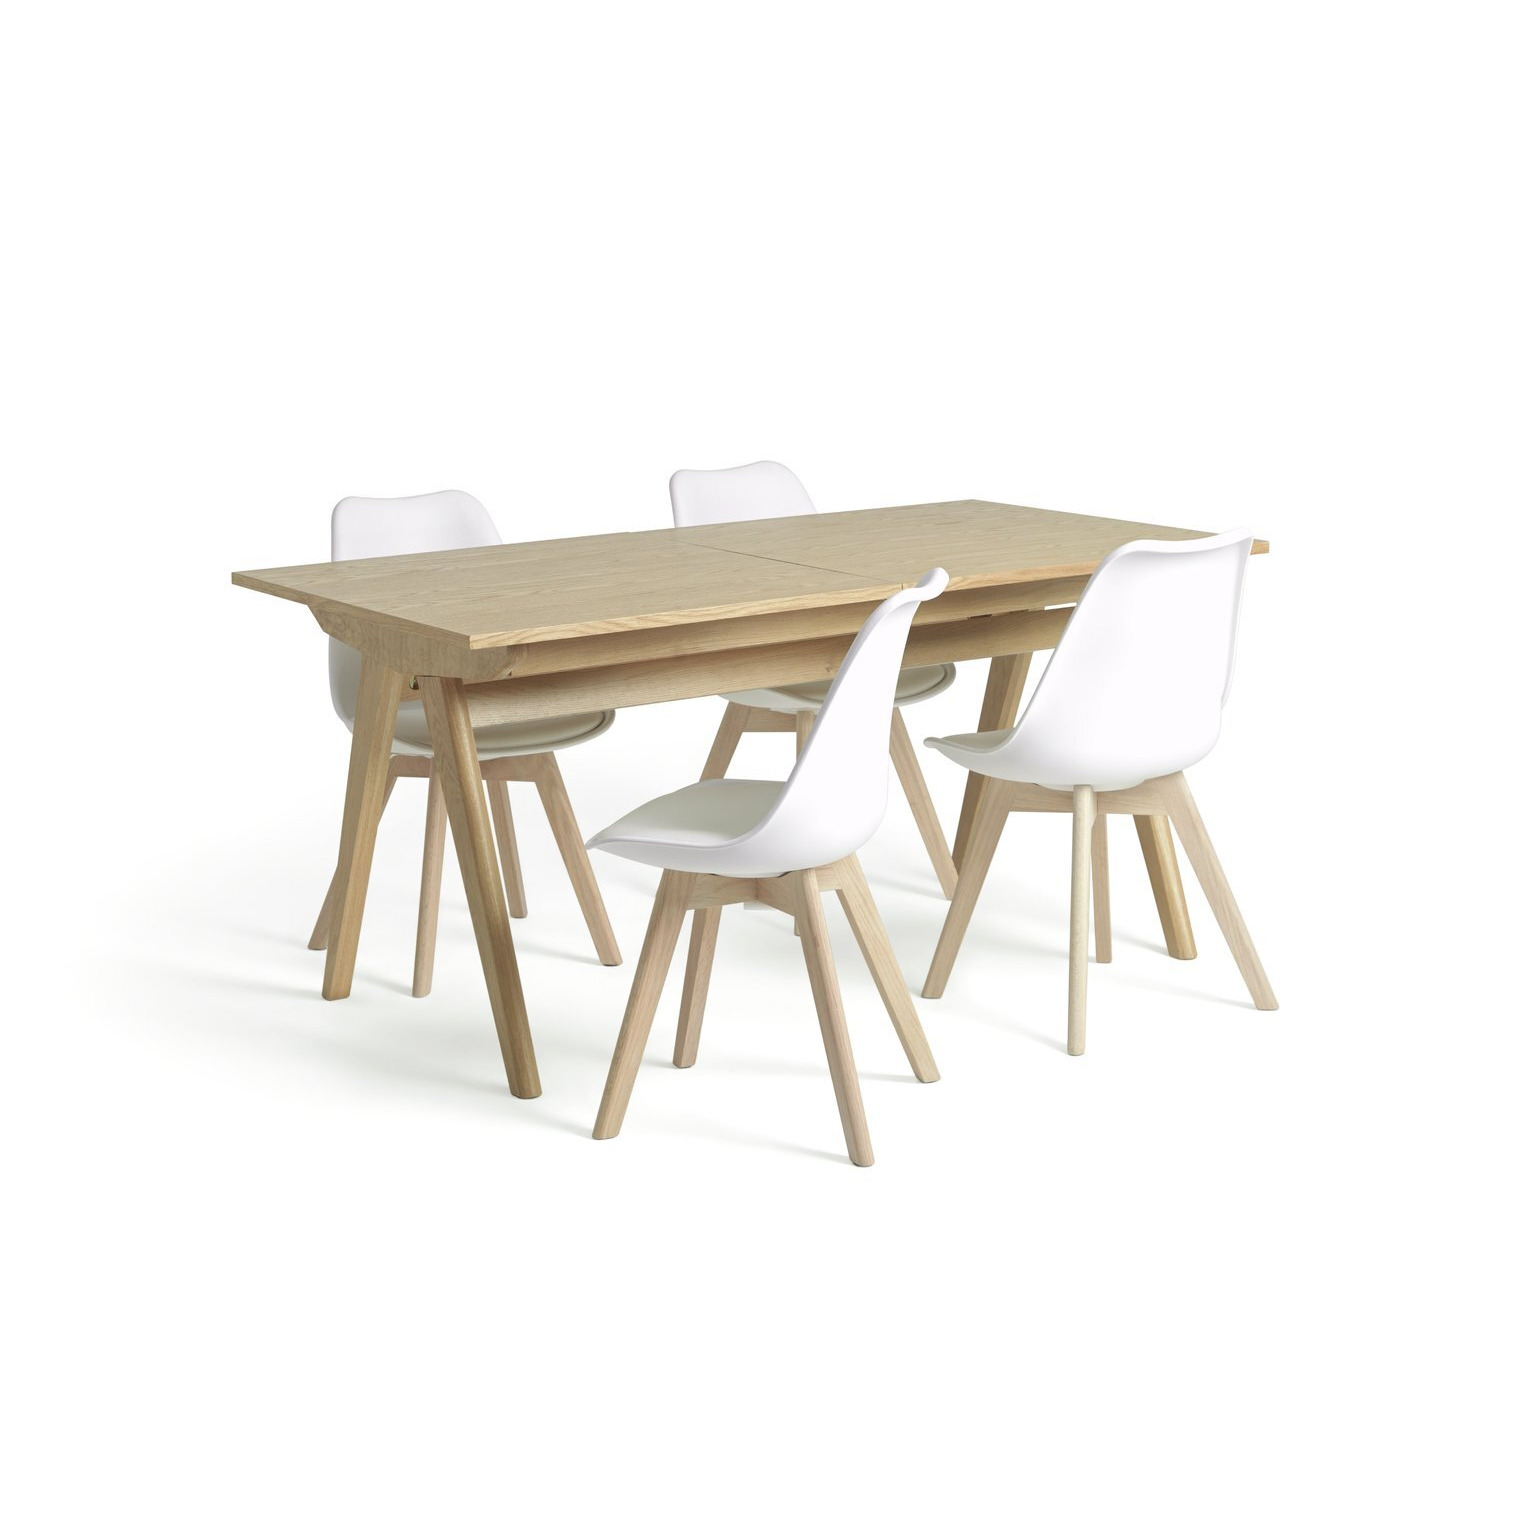 Habitat Jerry Extending Table & 4 White Chairs - image 1